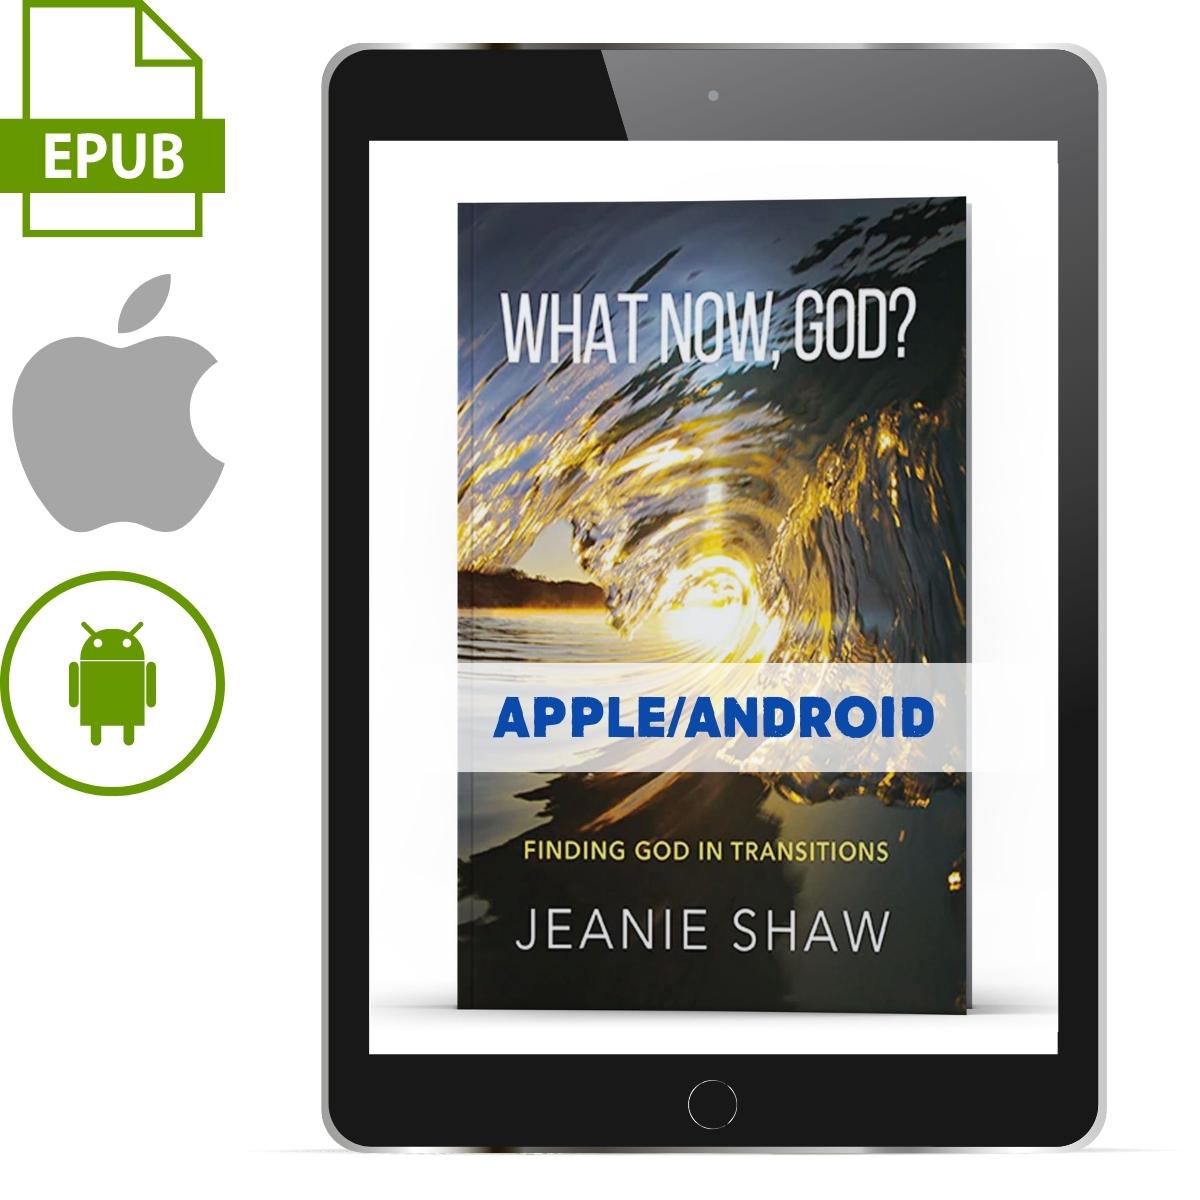 What Now, God? Finding God in Transitions (Apple/Android ePub) - Illumination Publishers